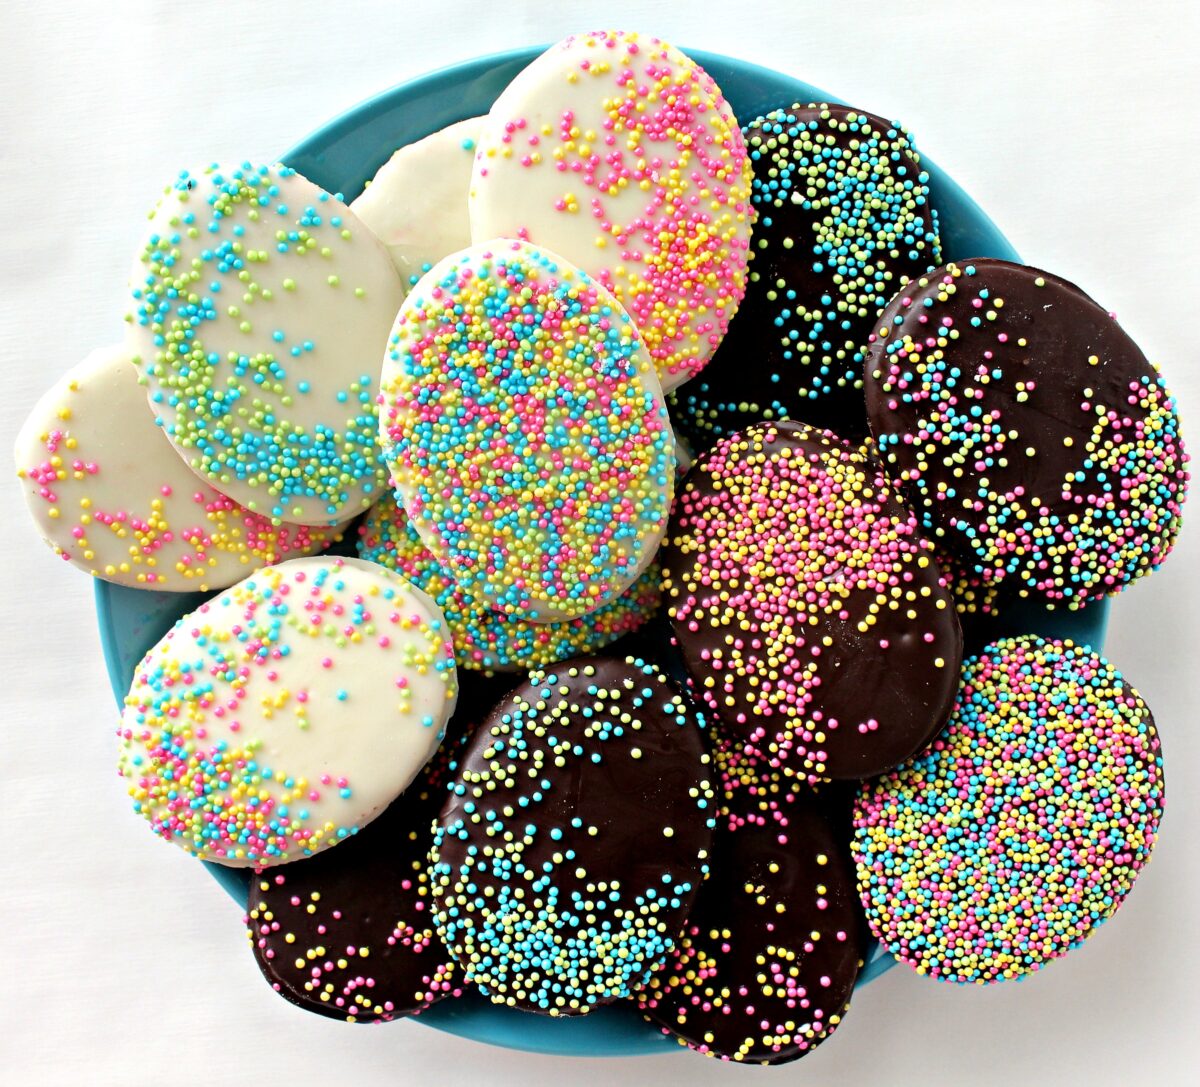  Easter Egg cookies covered in chocolate and sprinkles on an aqua plate.